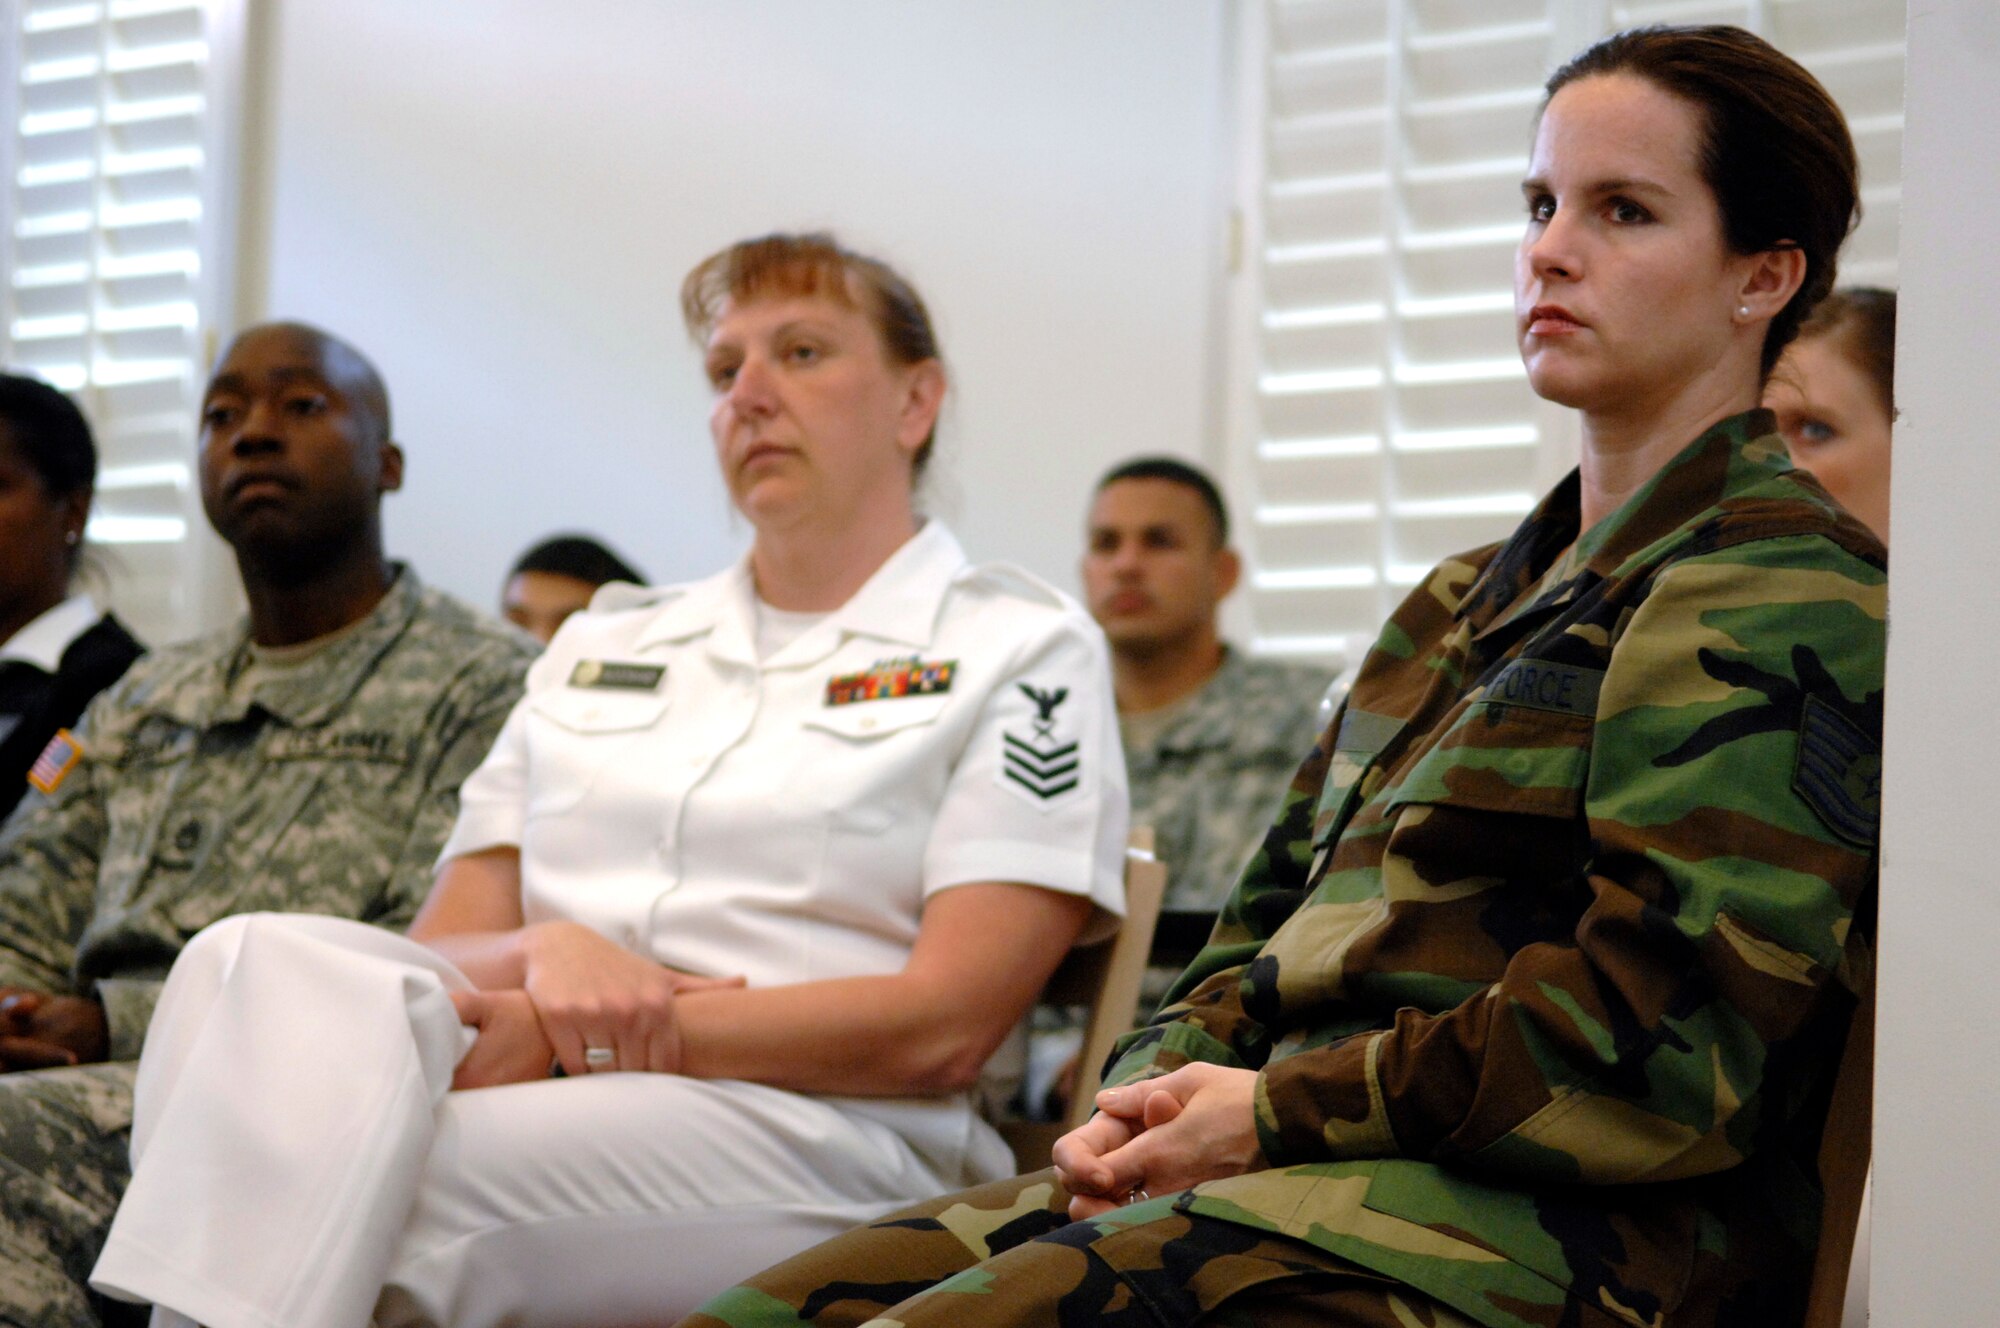 WASHINGTON --  U.S. Air Force Tech. Sgt. Alicia Ward (far right) attends an all-hands meeting on Fort McNair, D.C., May 21, 2008. Tech. Sgt. Ward is a member of the Armed Forces Inaugural Committee preparing for the 56th Presidential Inauguration on January 20, 2009. (U.S. Air Force photo by Senior Airman Kathrine McDowell)